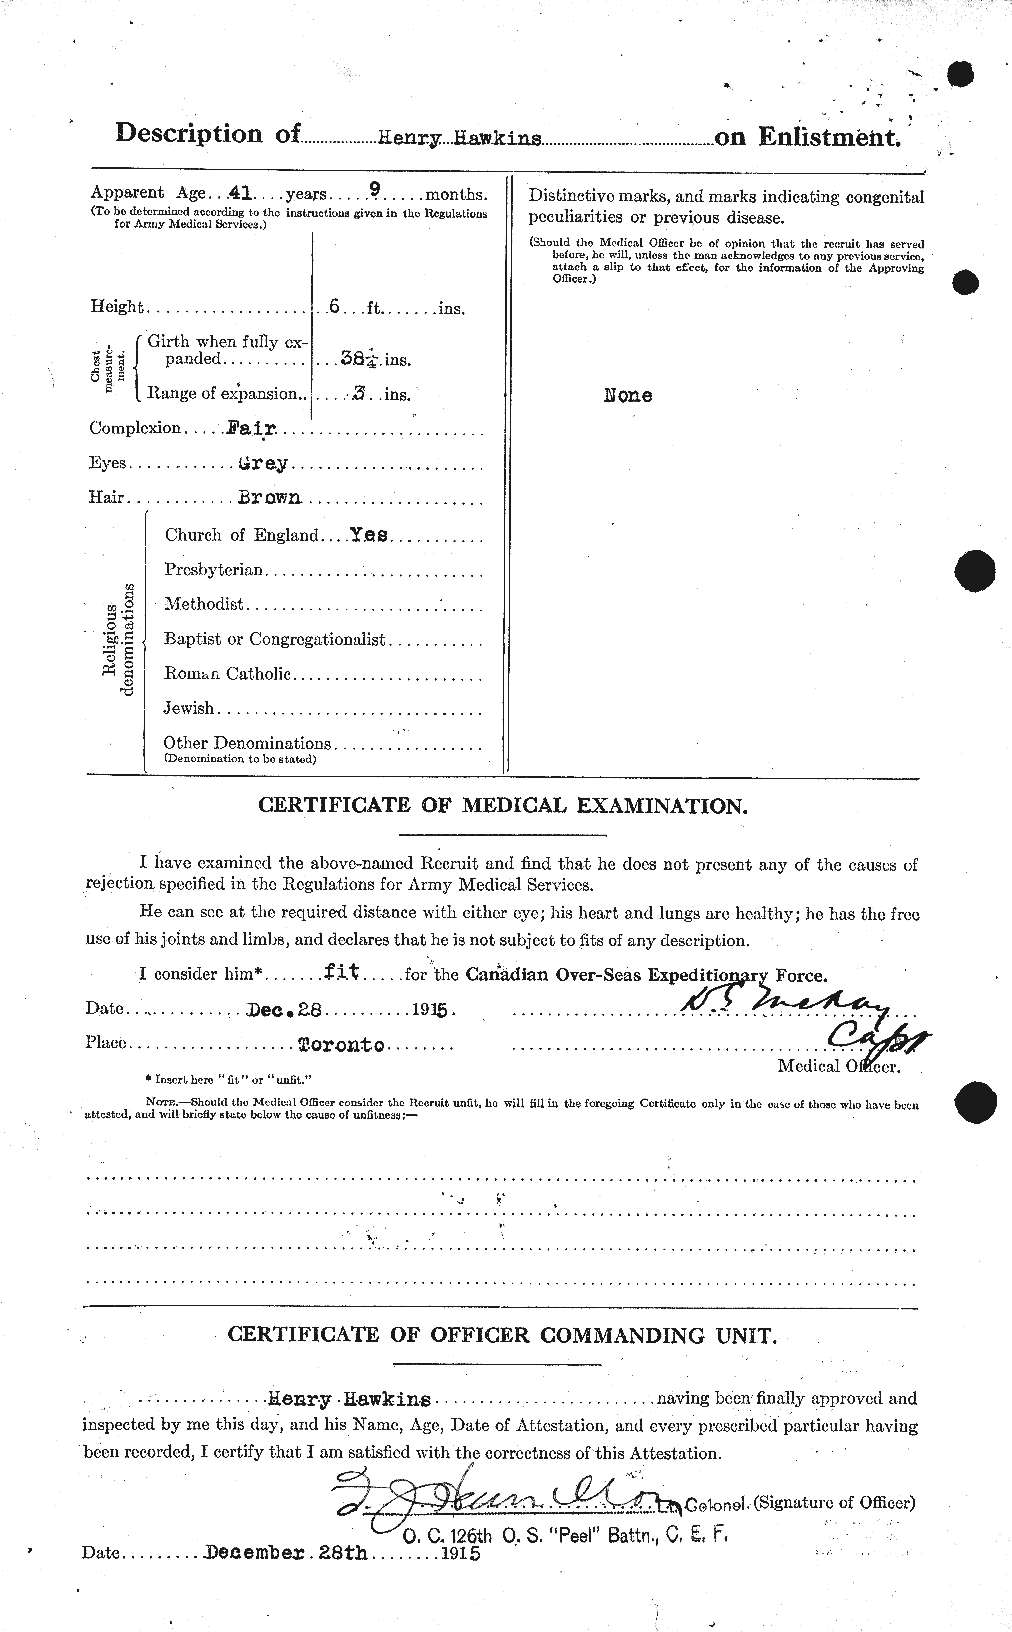 Personnel Records of the First World War - CEF 387143b